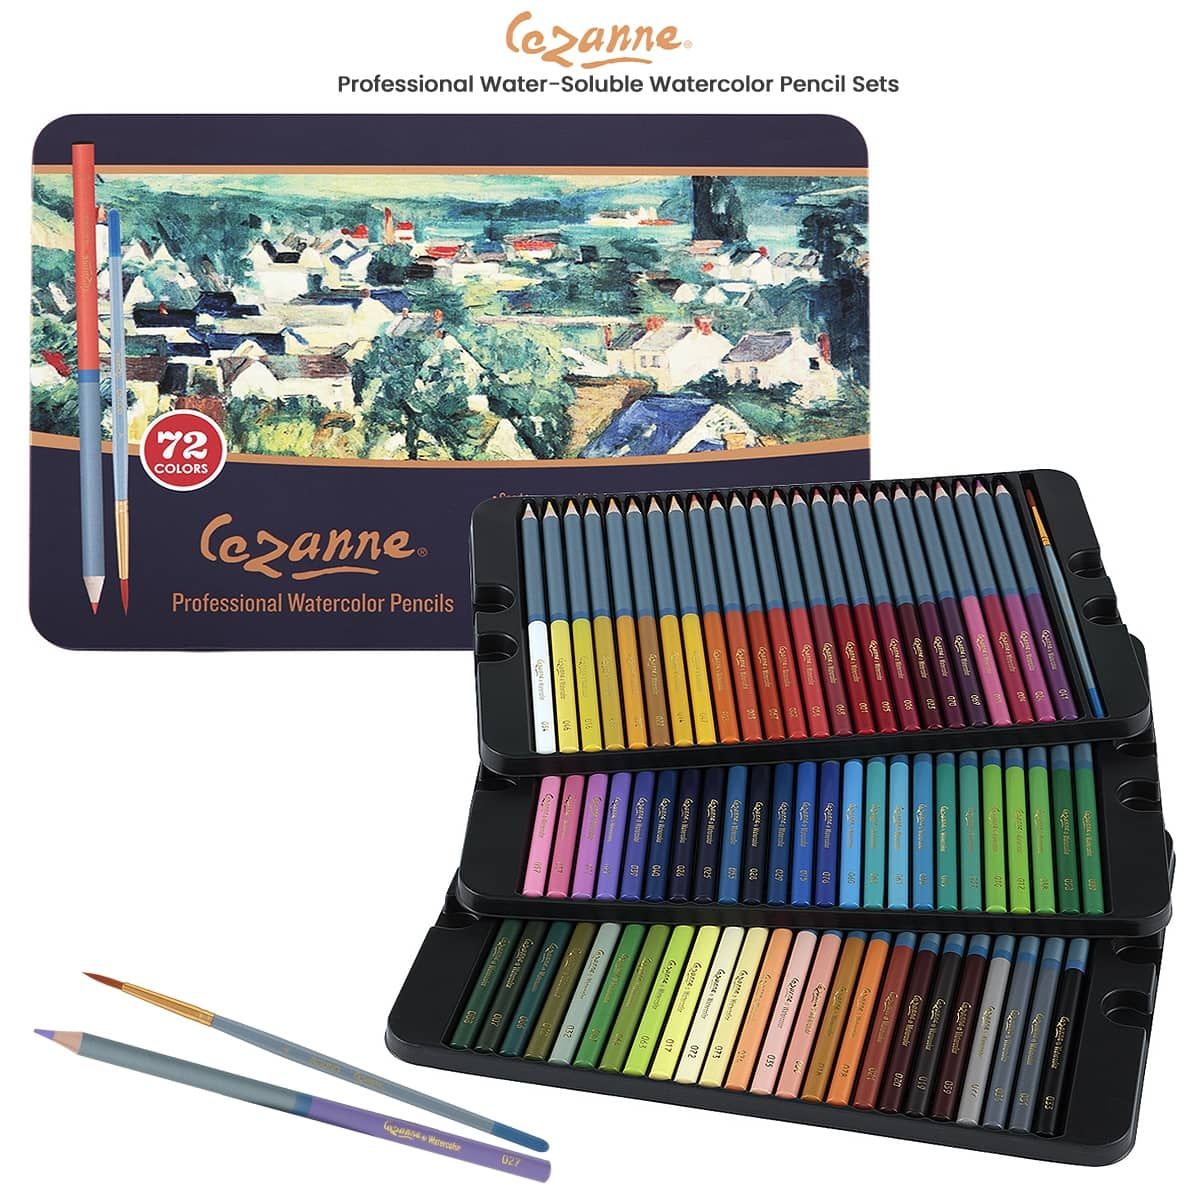 Cezanne PRO Water-Soluble Colored Pencil Sets